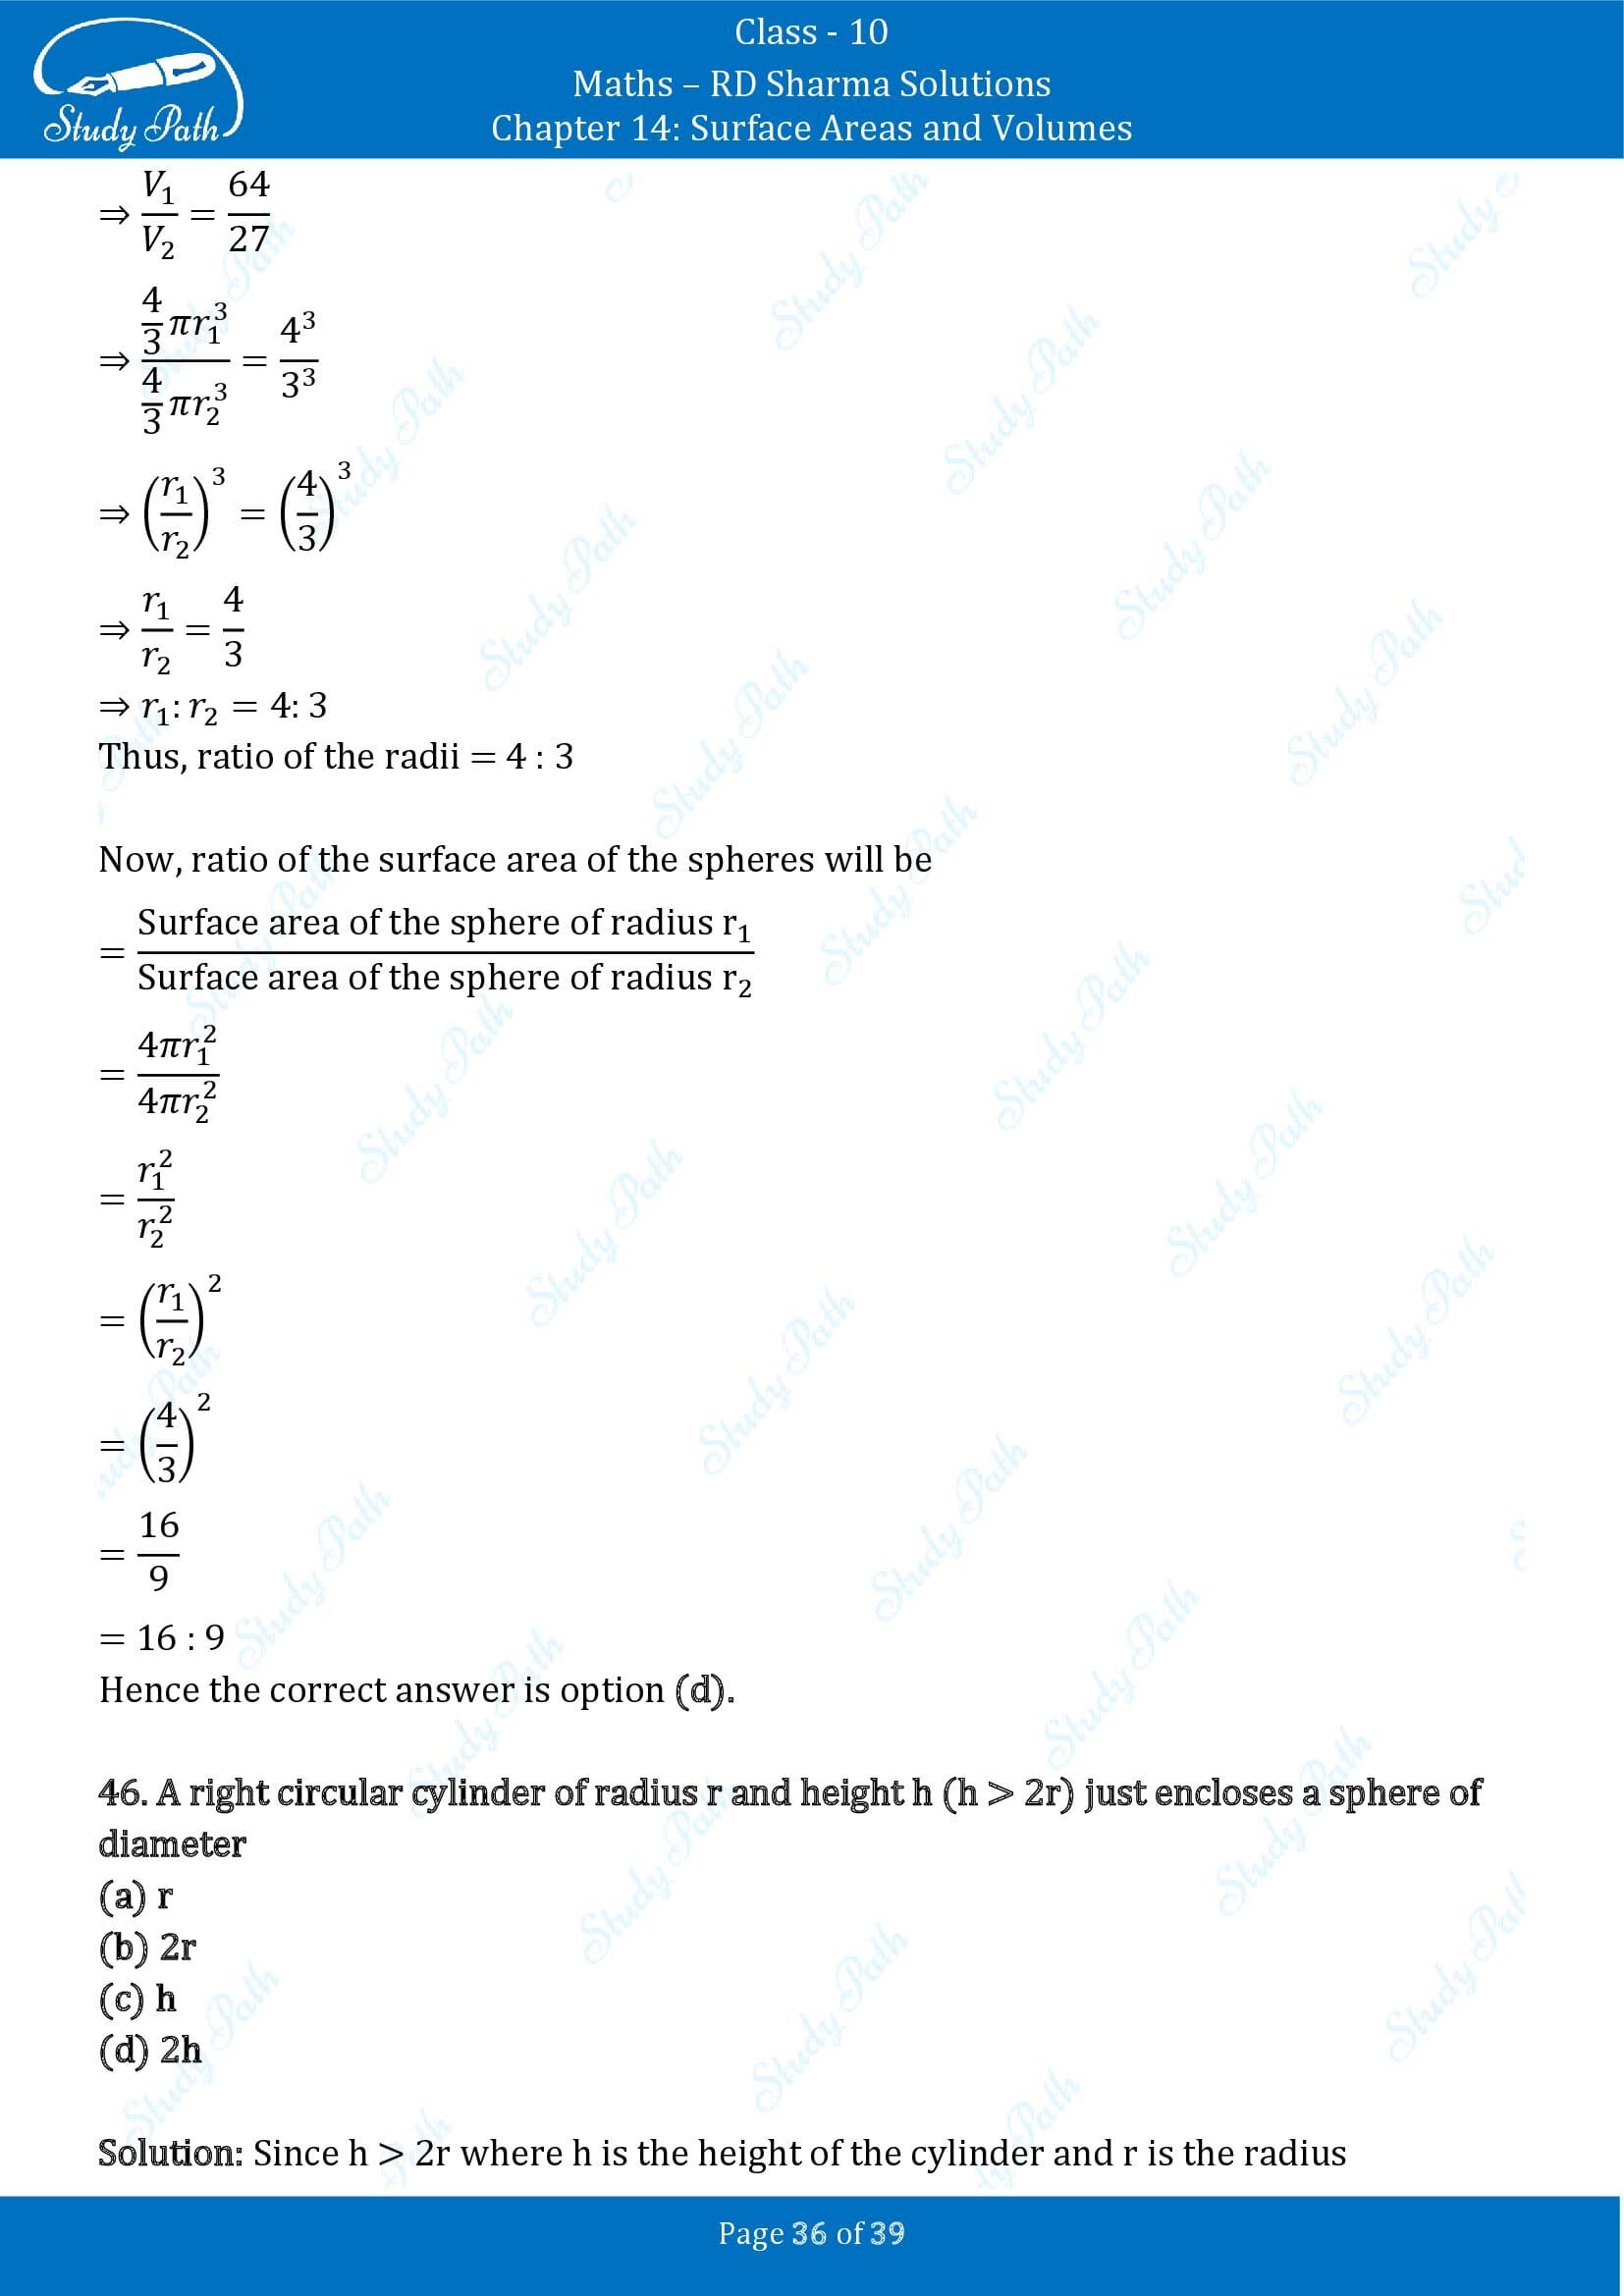 RD Sharma Solutions Class 10 Chapter 14 Surface Areas and Volumes Multiple Choice Question MCQs 00036